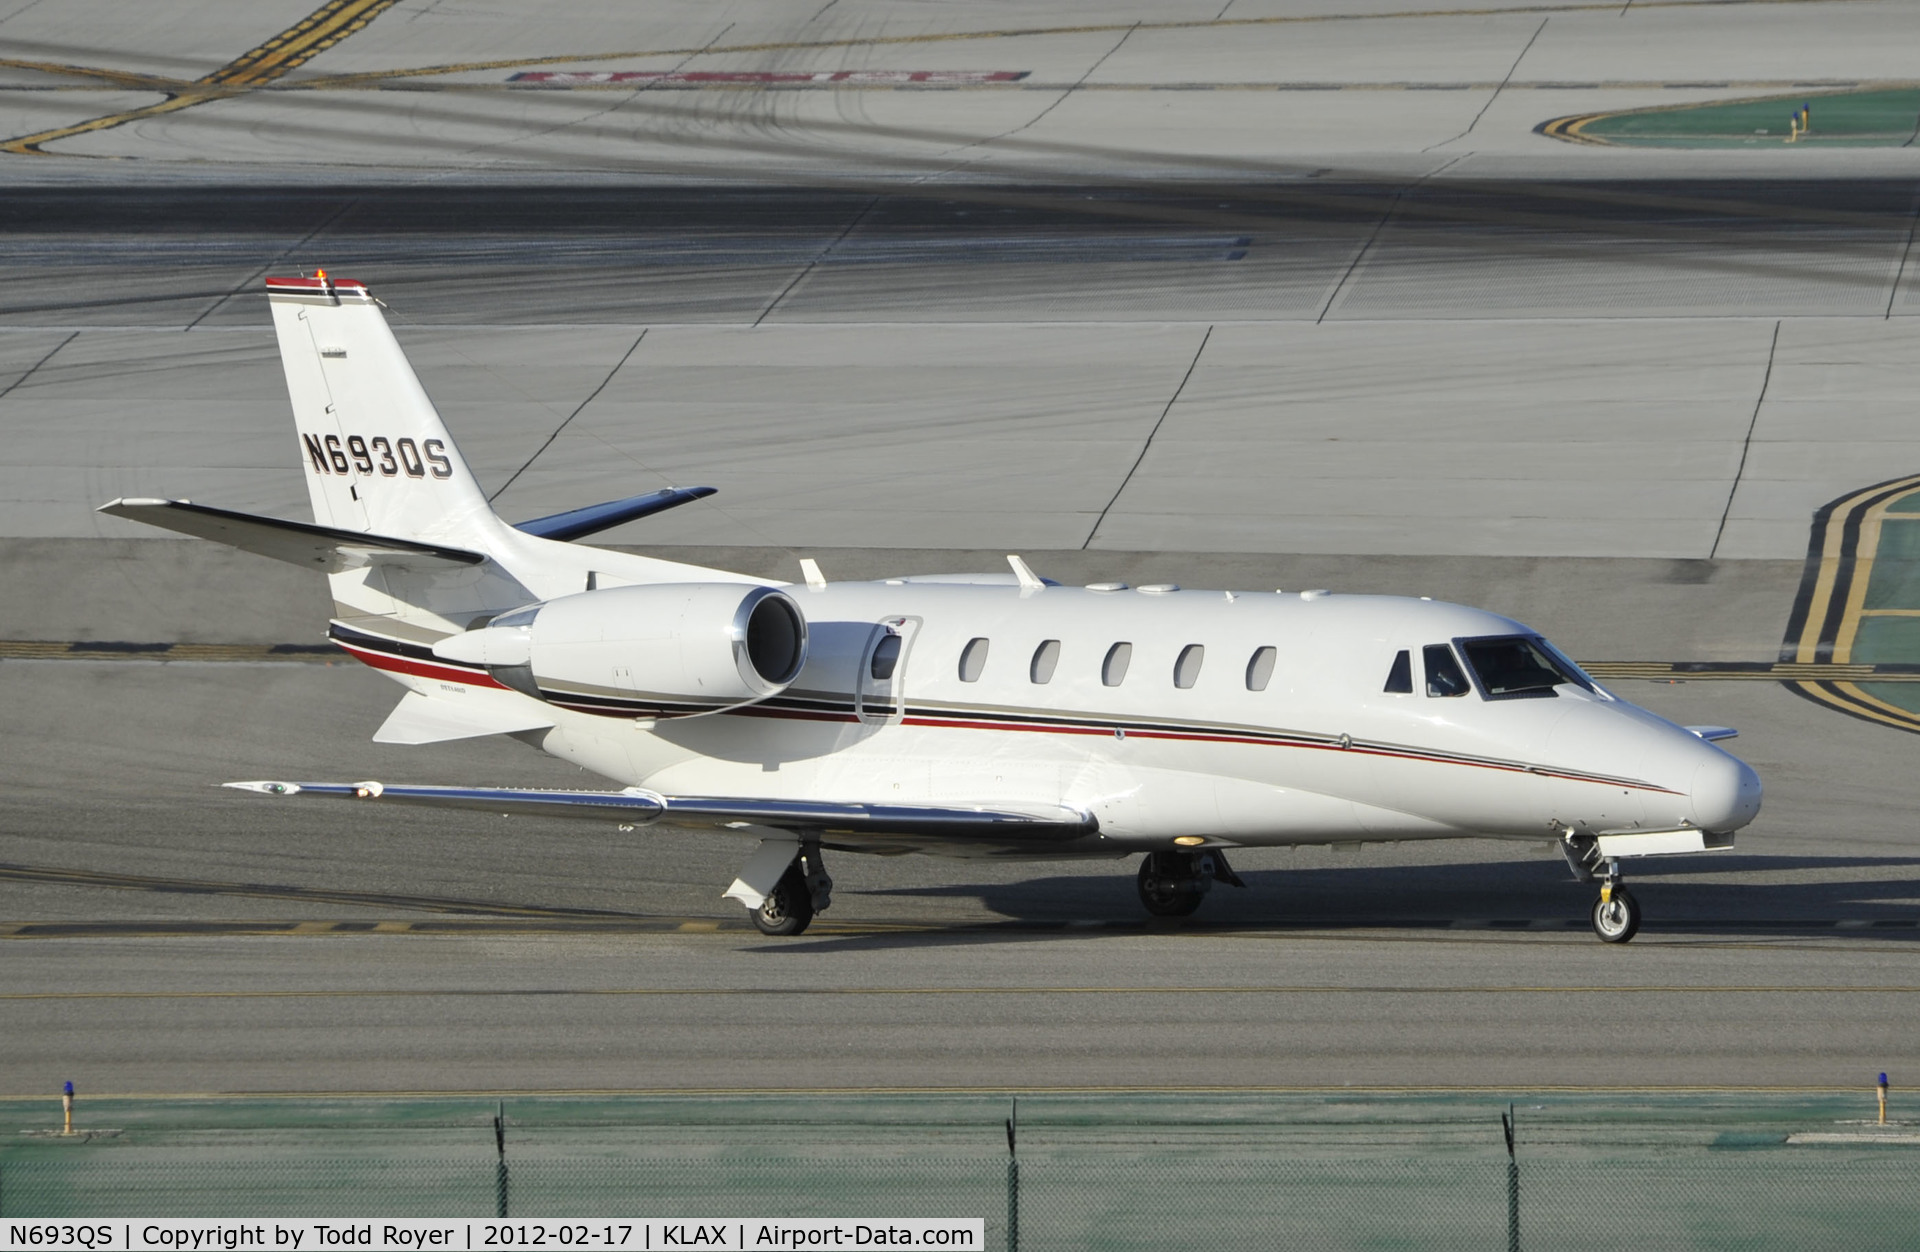 N693QS, 2006 Cessna 560XLS Citation Excel C/N 560-5657, Taxiing to parking